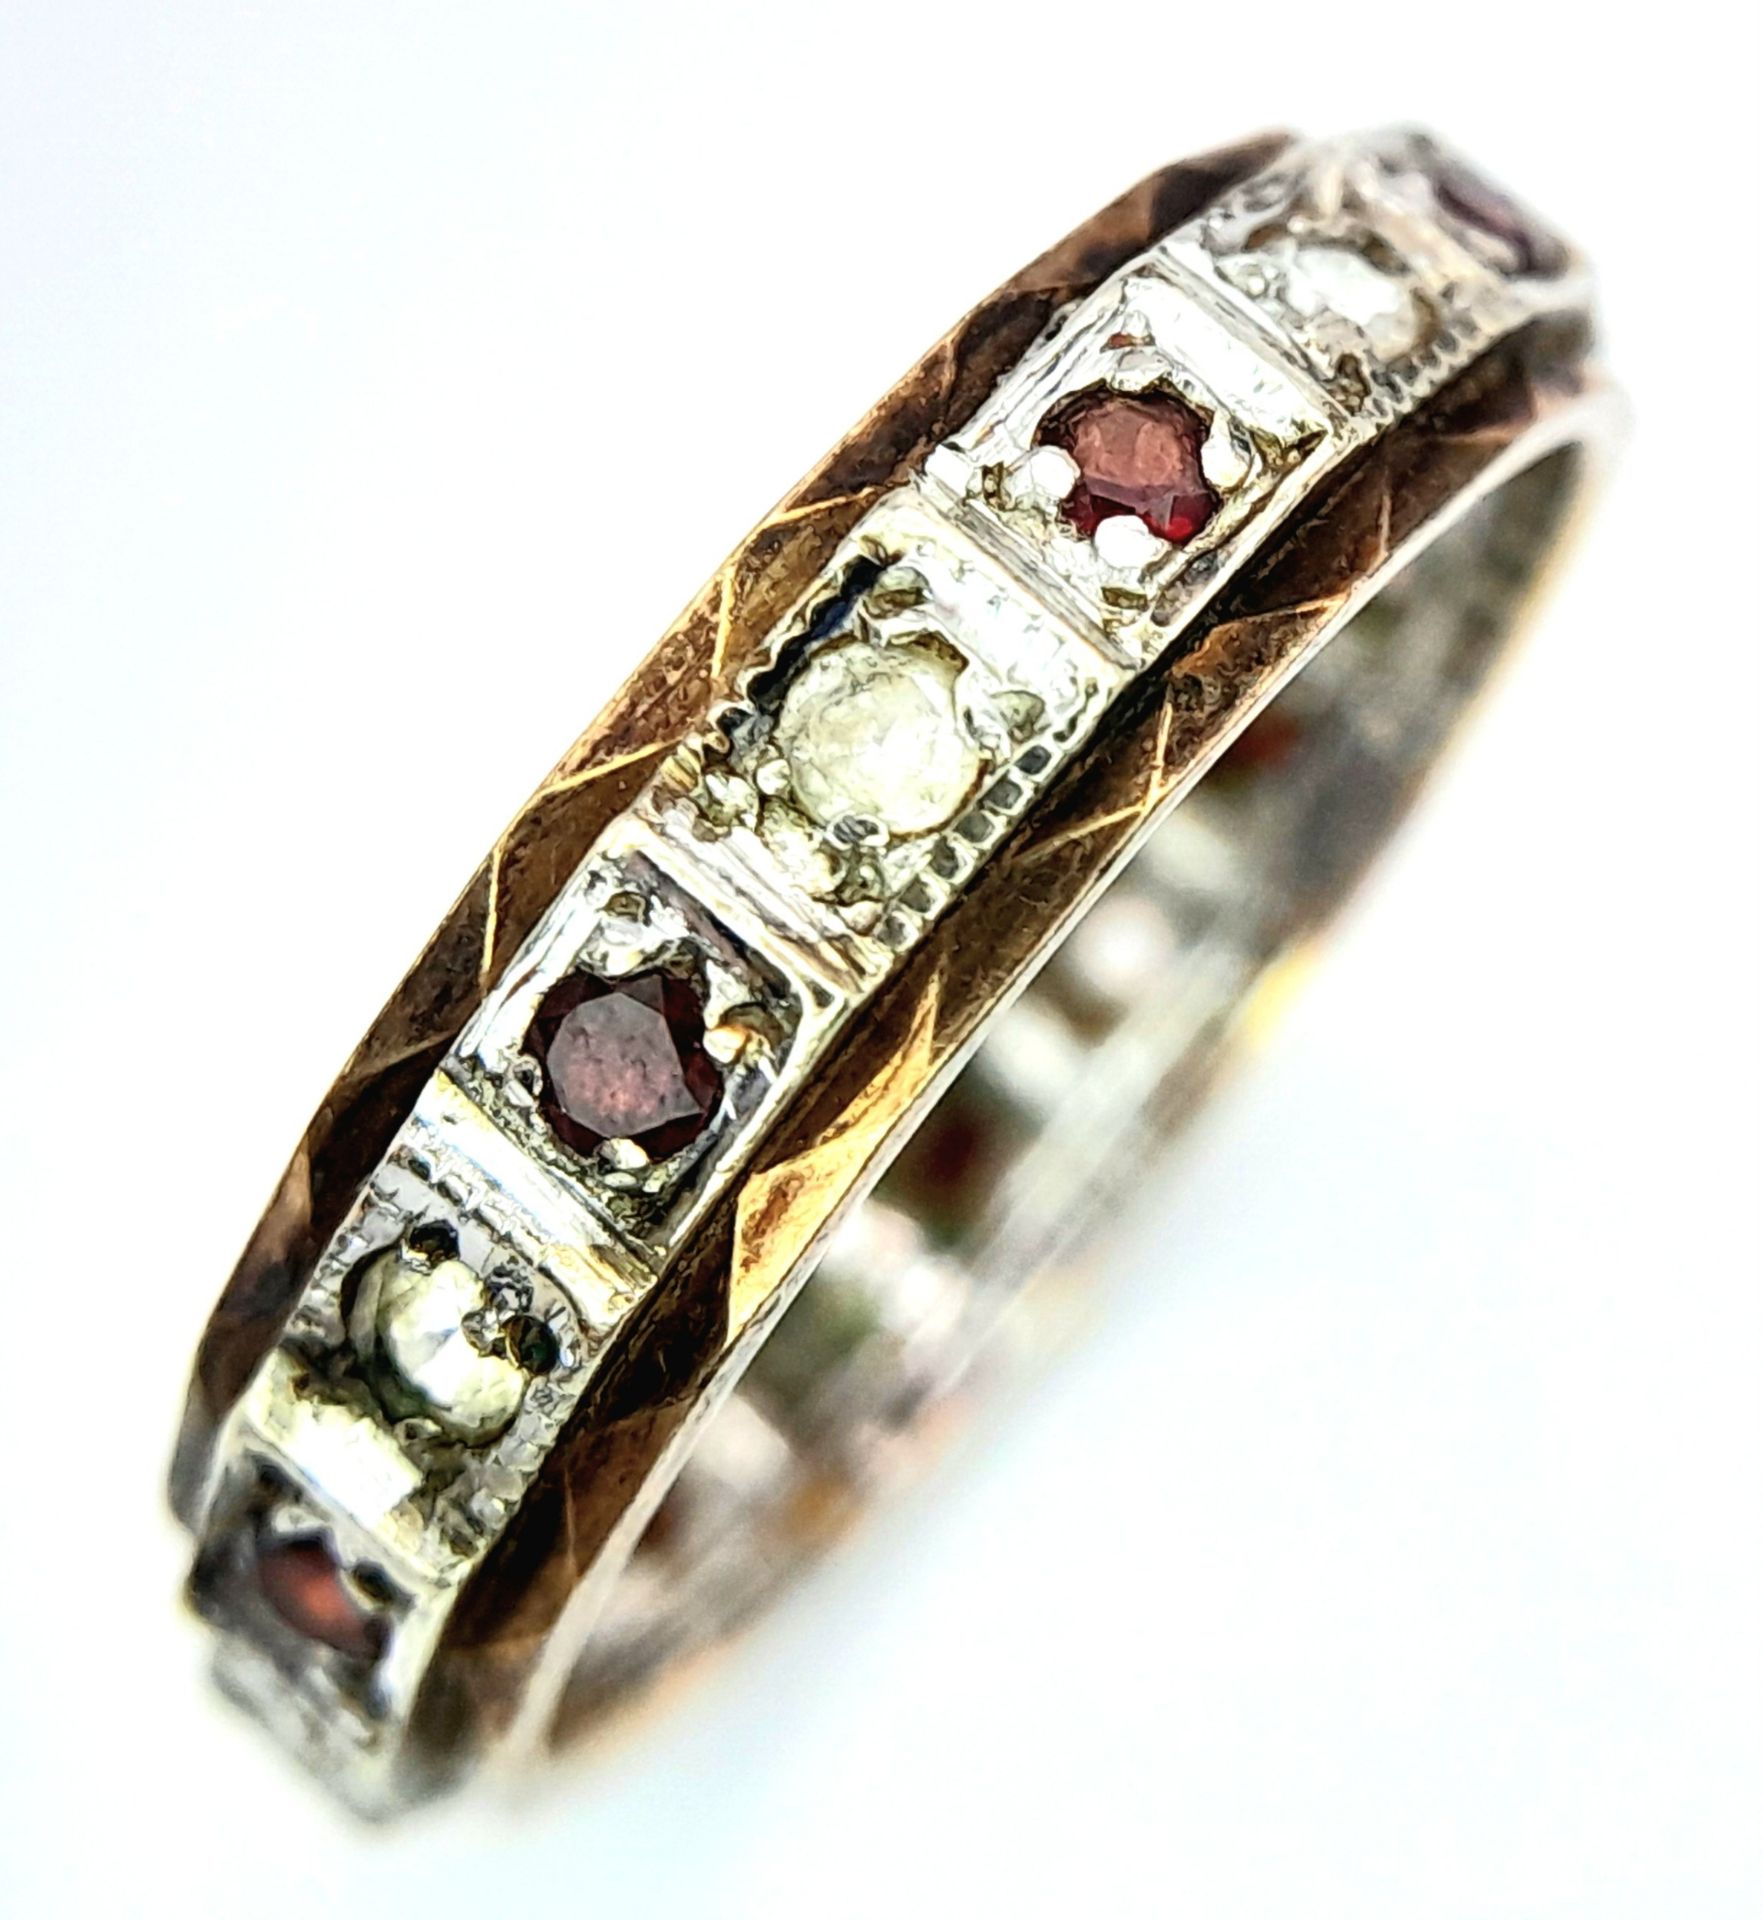 An unusual, vintage, eternity ring with alternating round cut diamonds and rubies. Size: L,